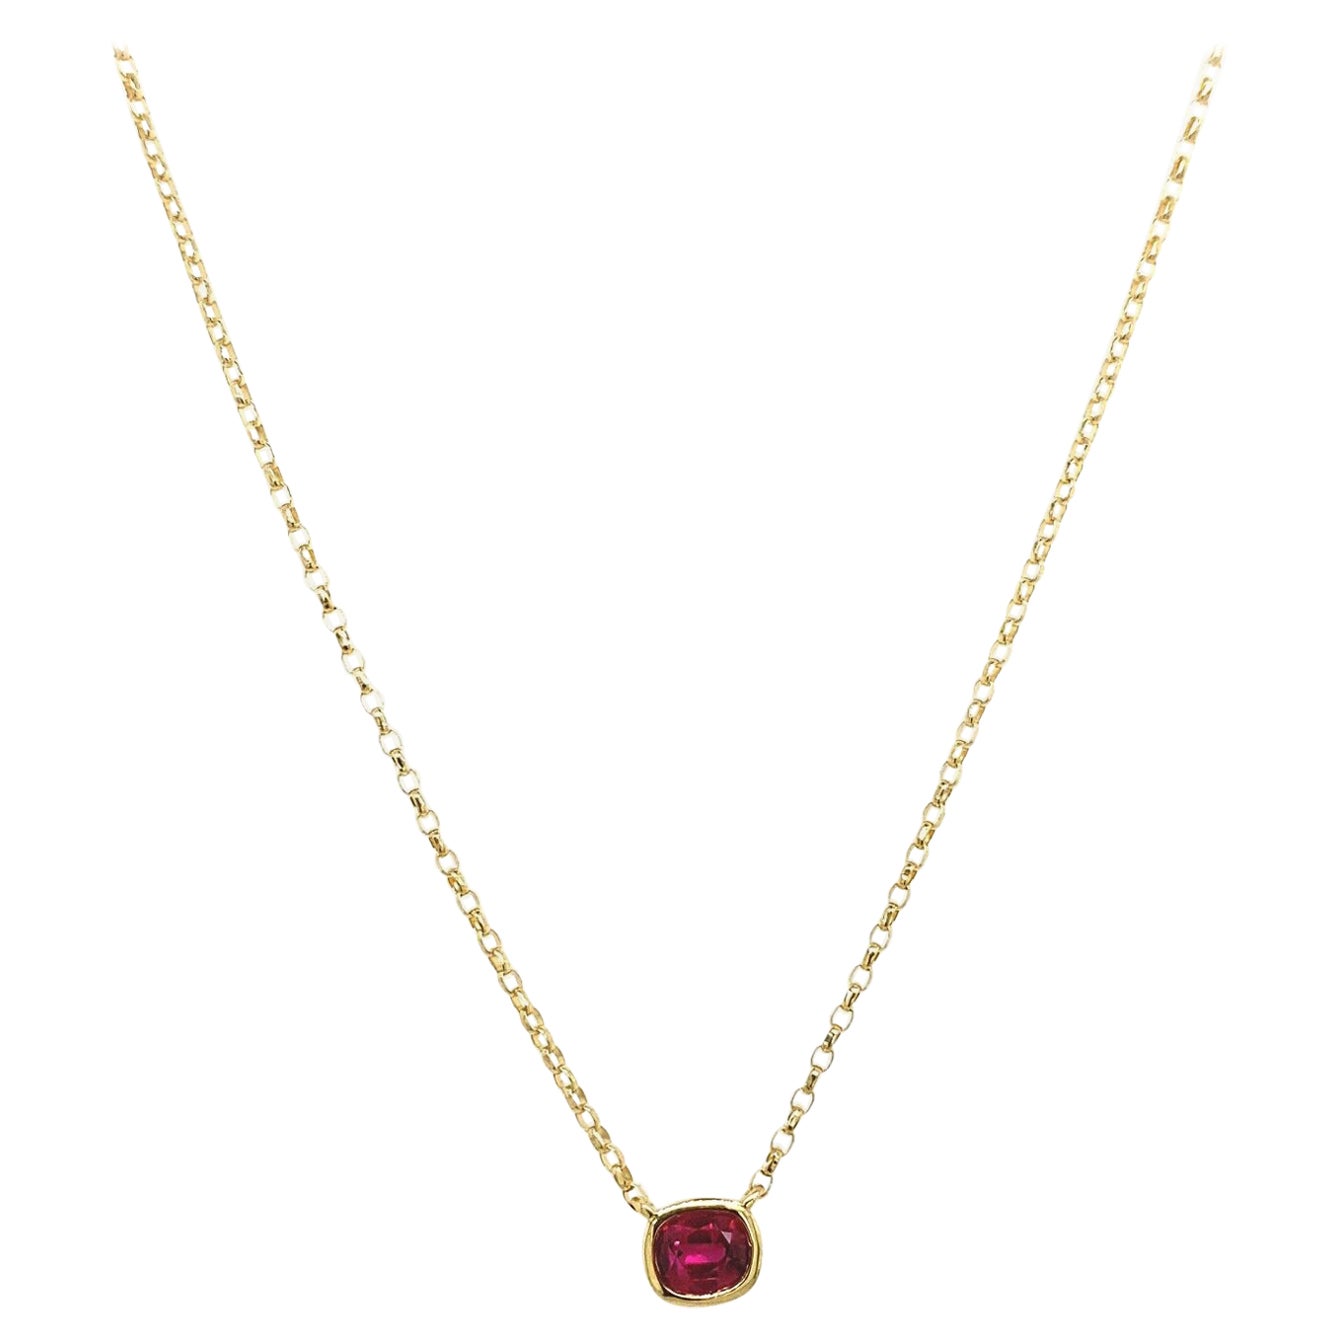 0.41ct Cushion Shape Ruby Pendant Set in 18ct Yellow Gold